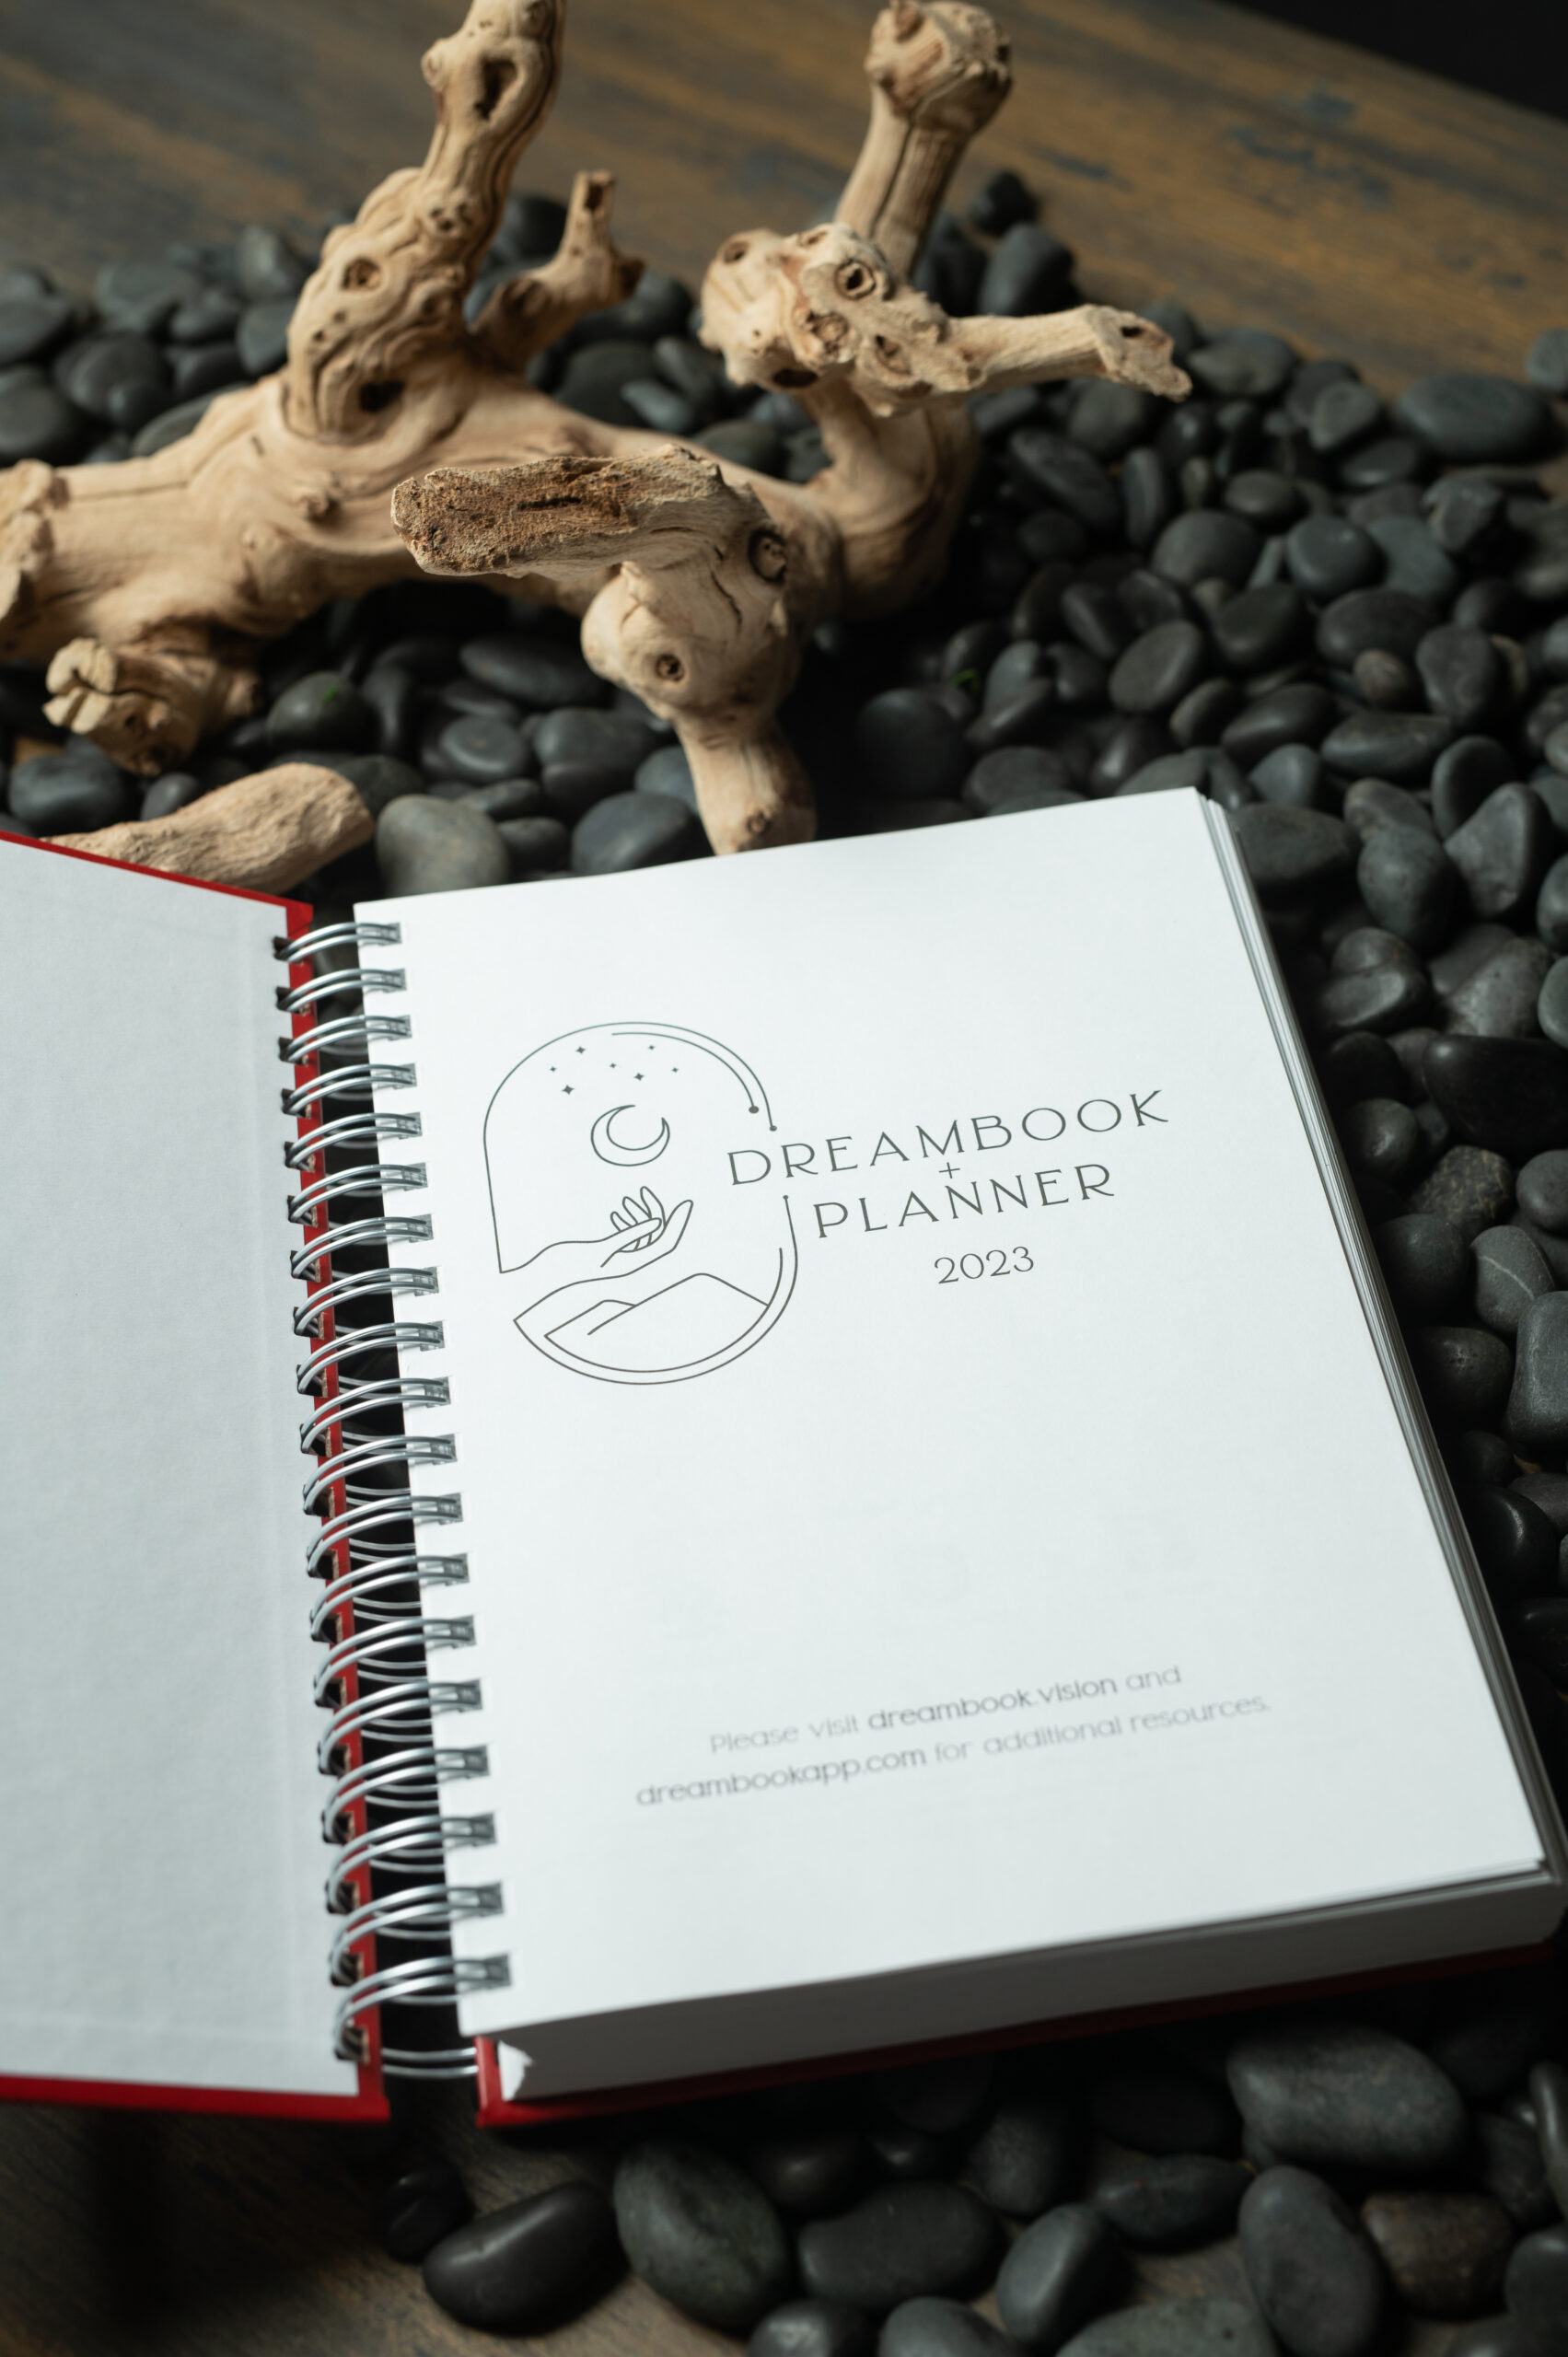 The 2022 Dreambook + Planner – The Dragontree Apothecary